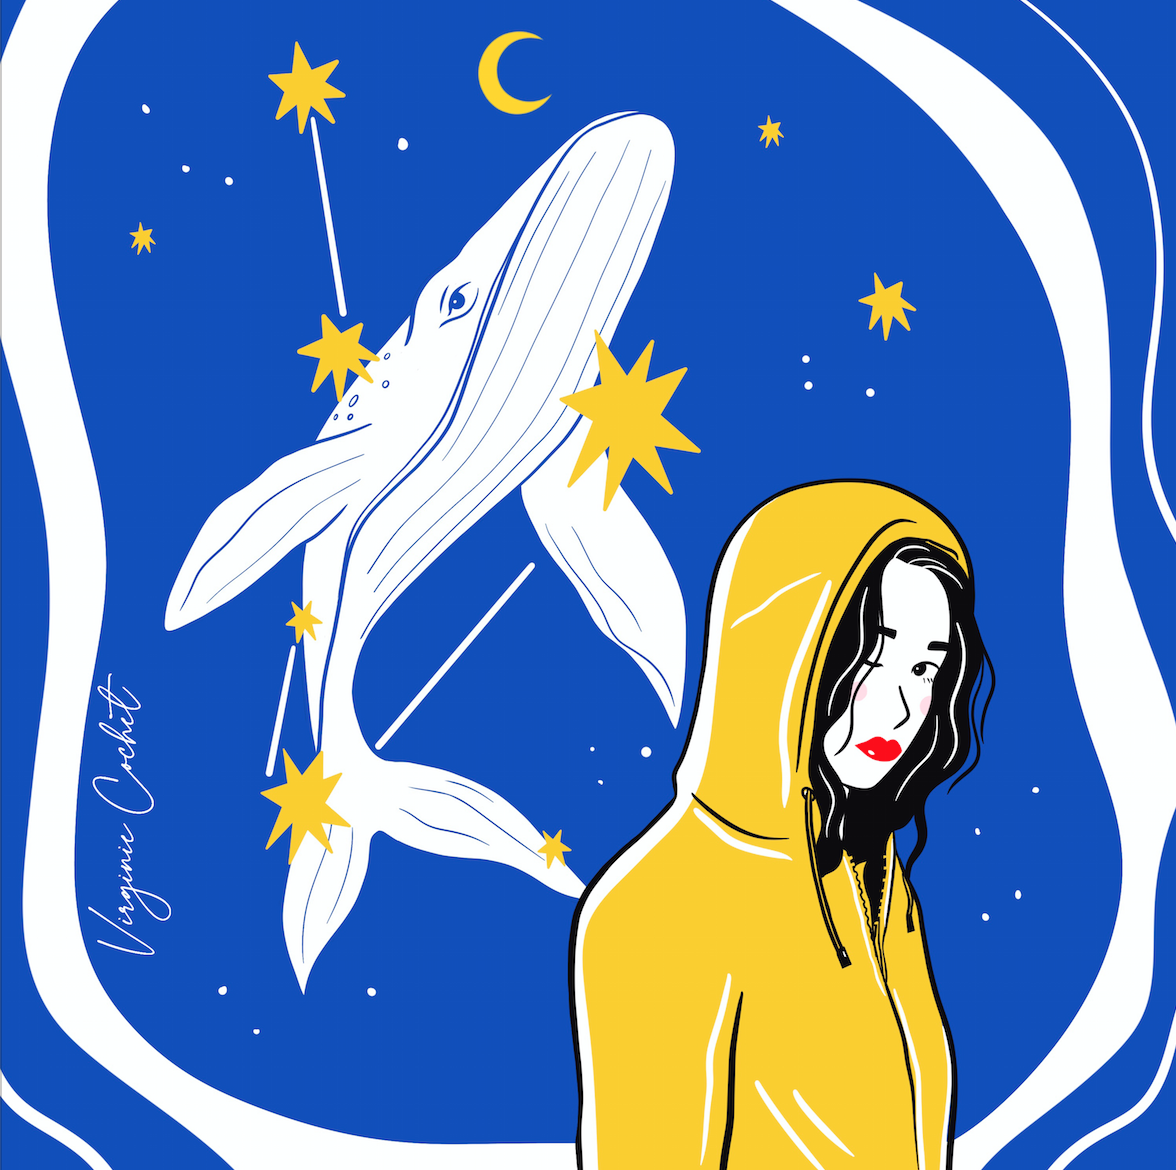 Whale and stars